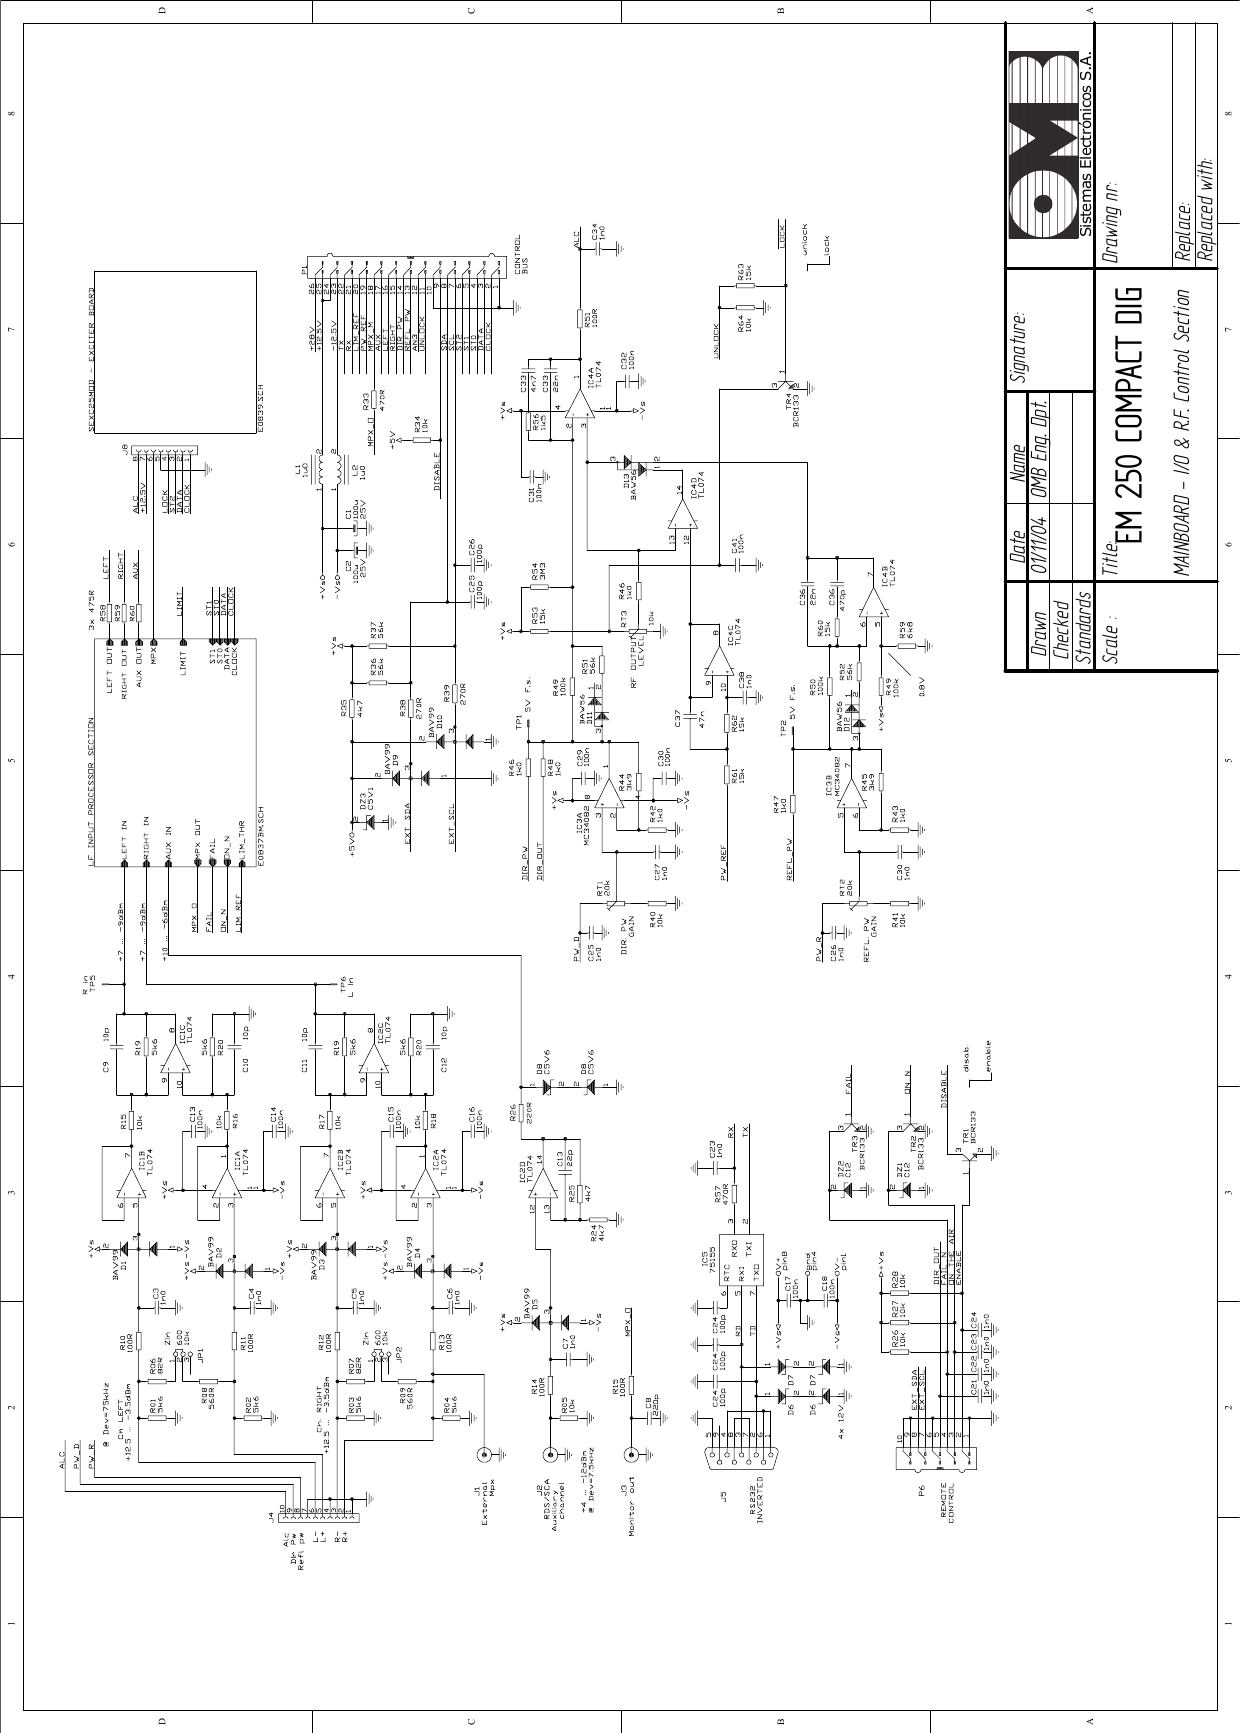 01/11/04   OMB Eng. Dpt. EM 250 COMPACT DIG MAINBOARD - I/O &amp; R.F. Control Section1 2 3 4 5 6 78ABCD87654321DCBADrawnCheckedStandardsDate Name Signature:Scale :Title: Drawing nr:Replace:Replaced with:Sistemas Electrónicos S.A.